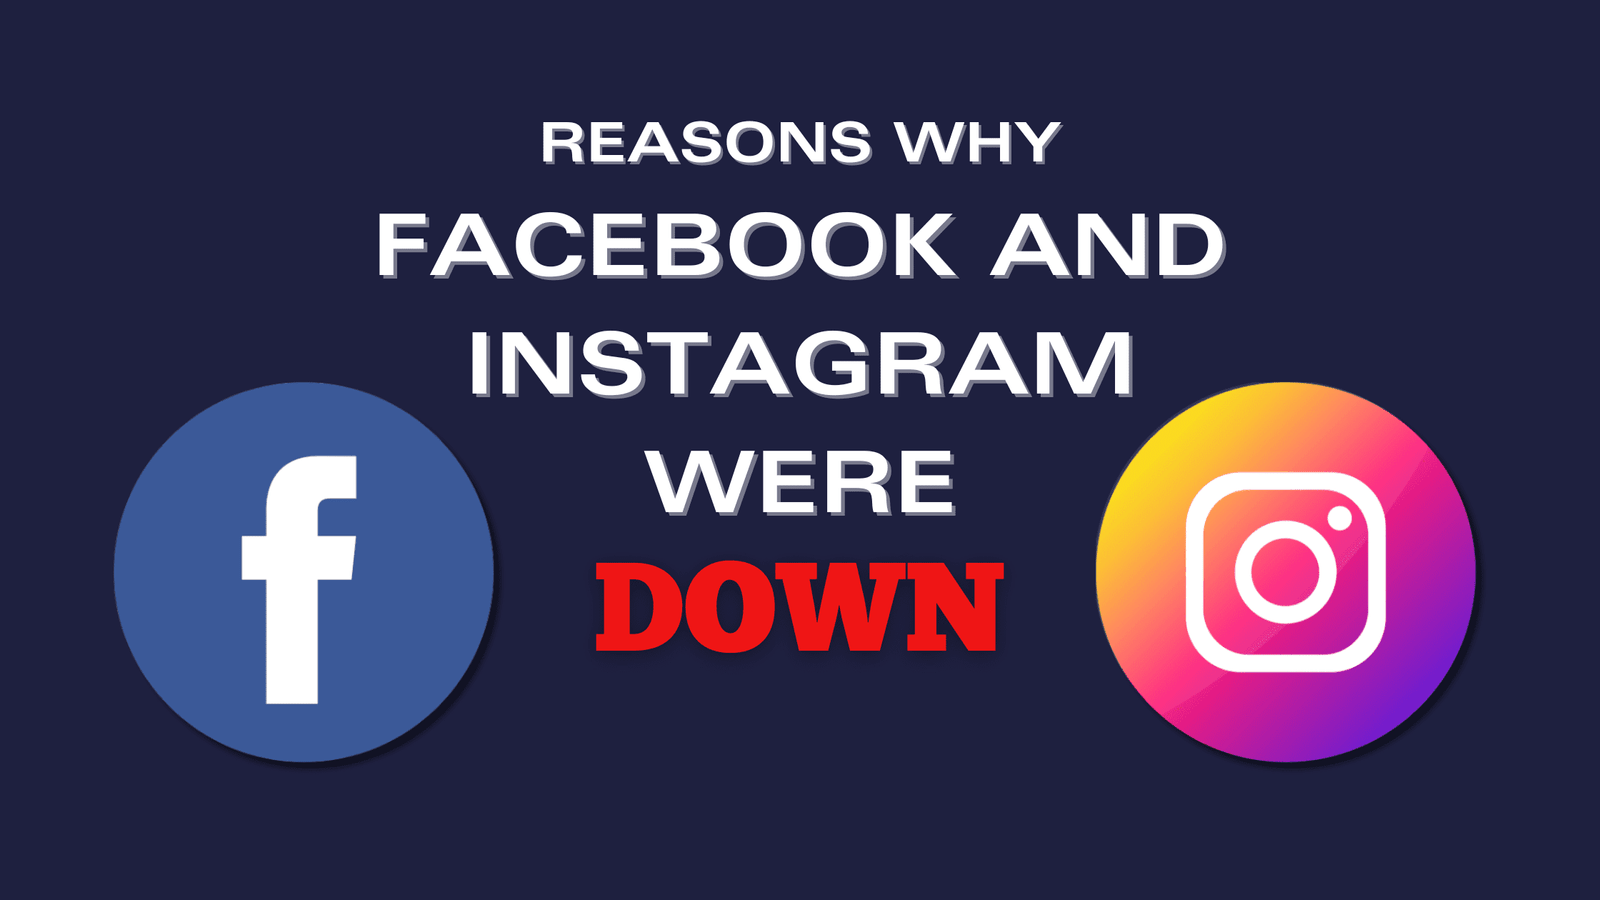 Here’s the full story behind Facebook and Instagram Down